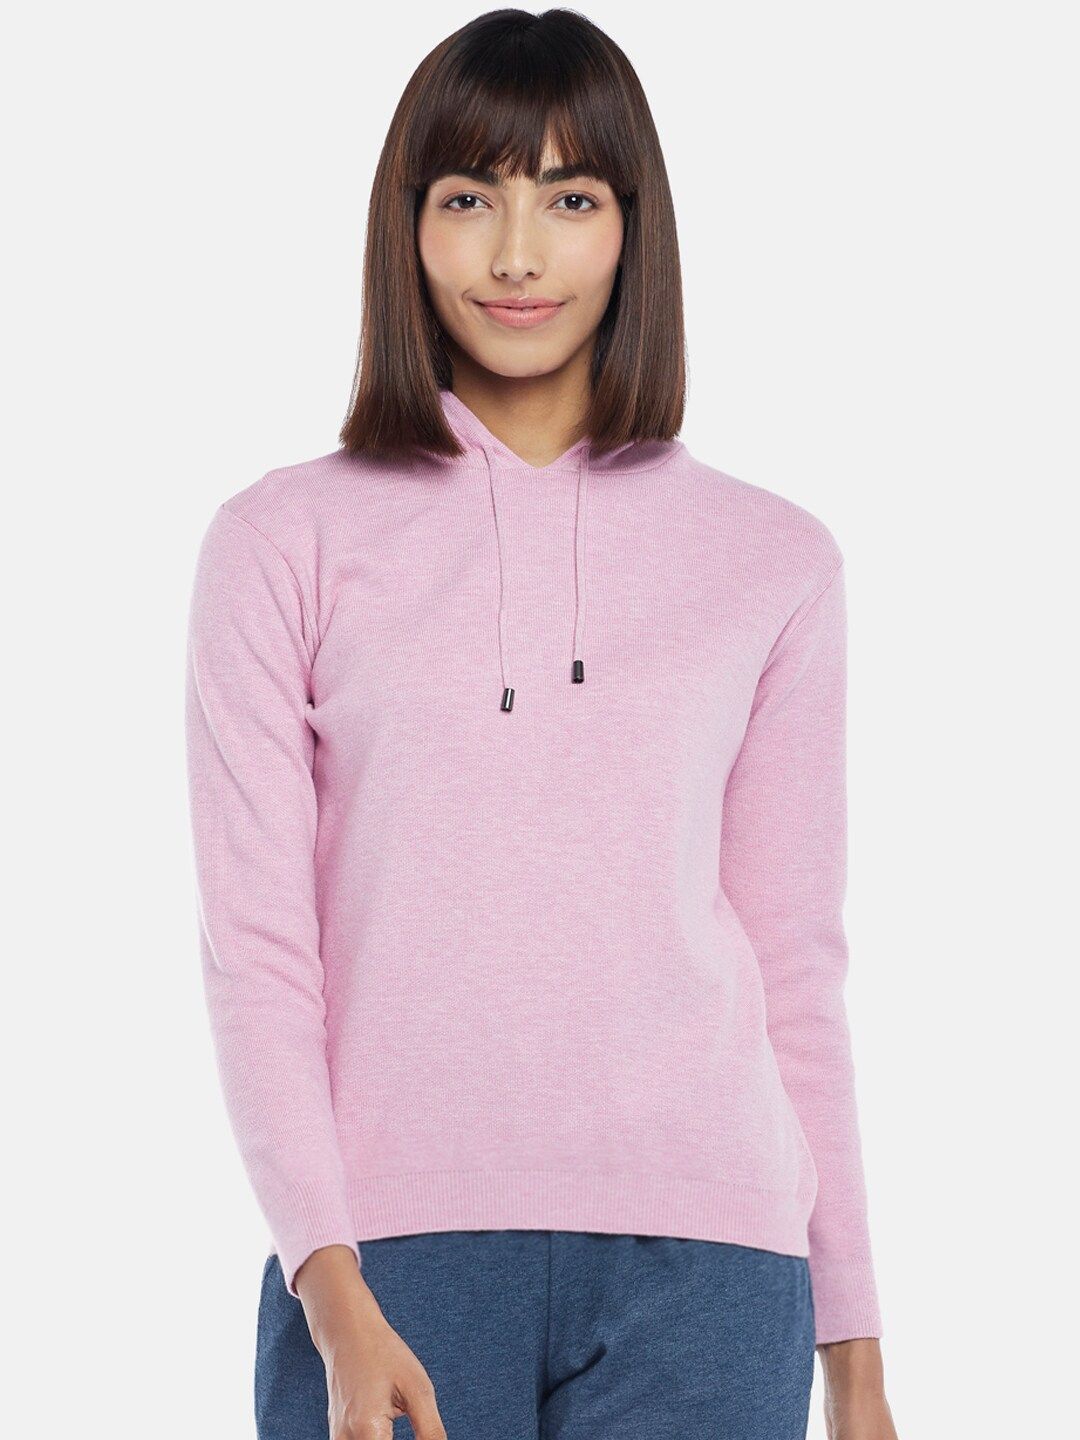 Dreamz by Pantaloons Women Pink Hooded Lounge T-shirt Price in India